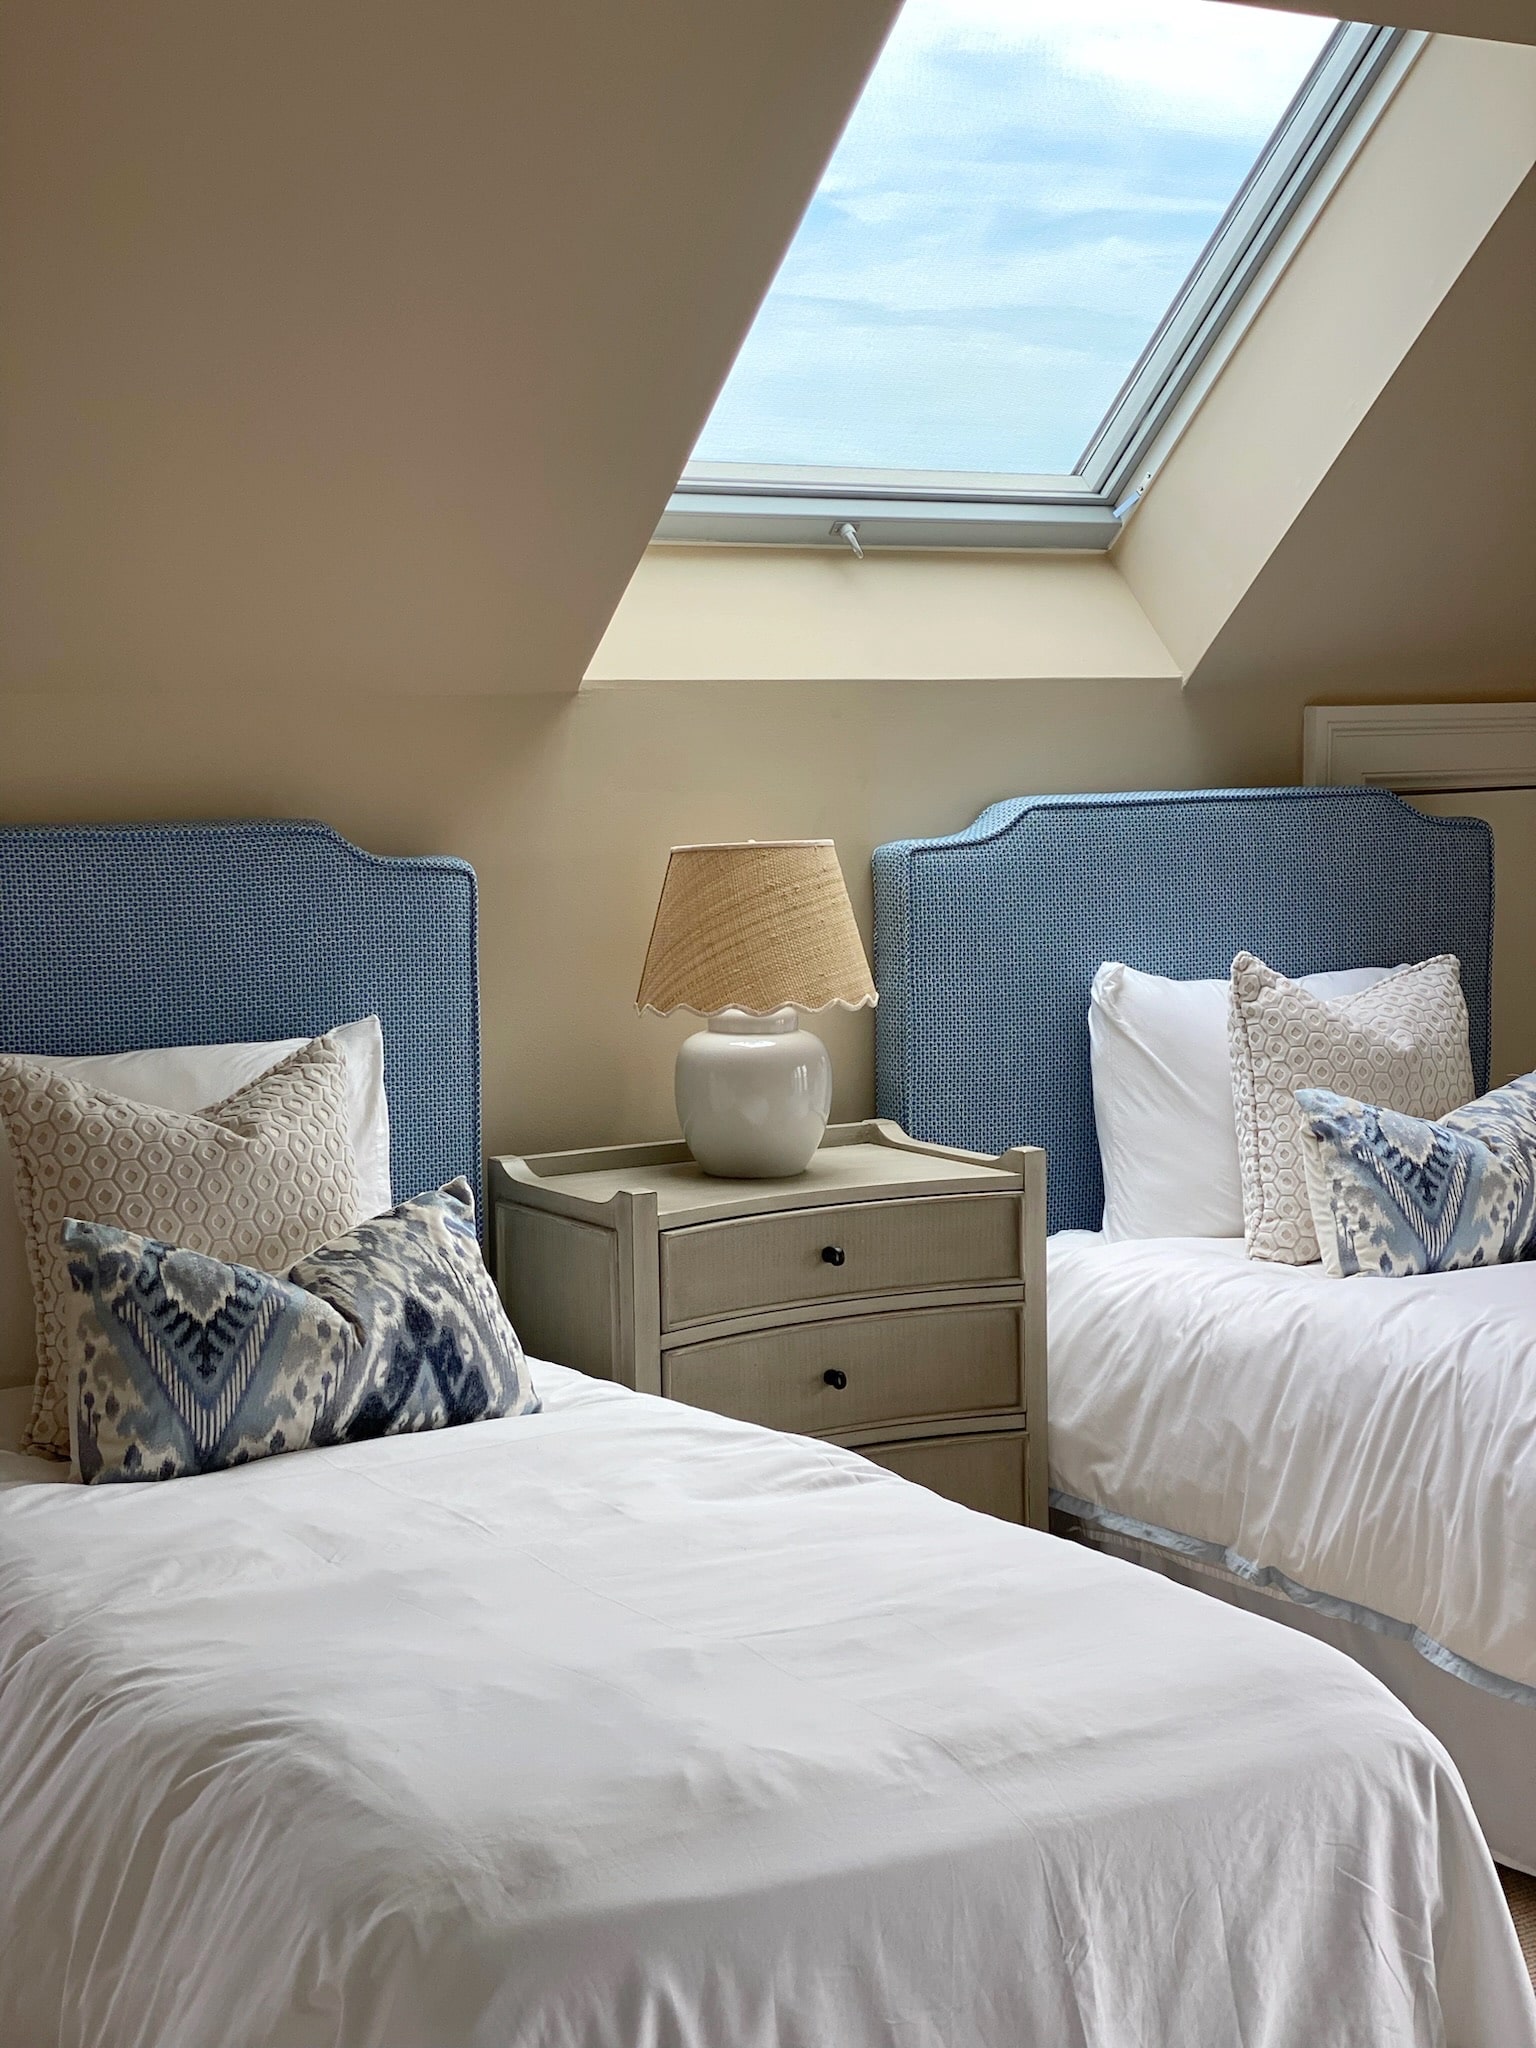 A stylishly designed bedroom with two beds and a skylight.